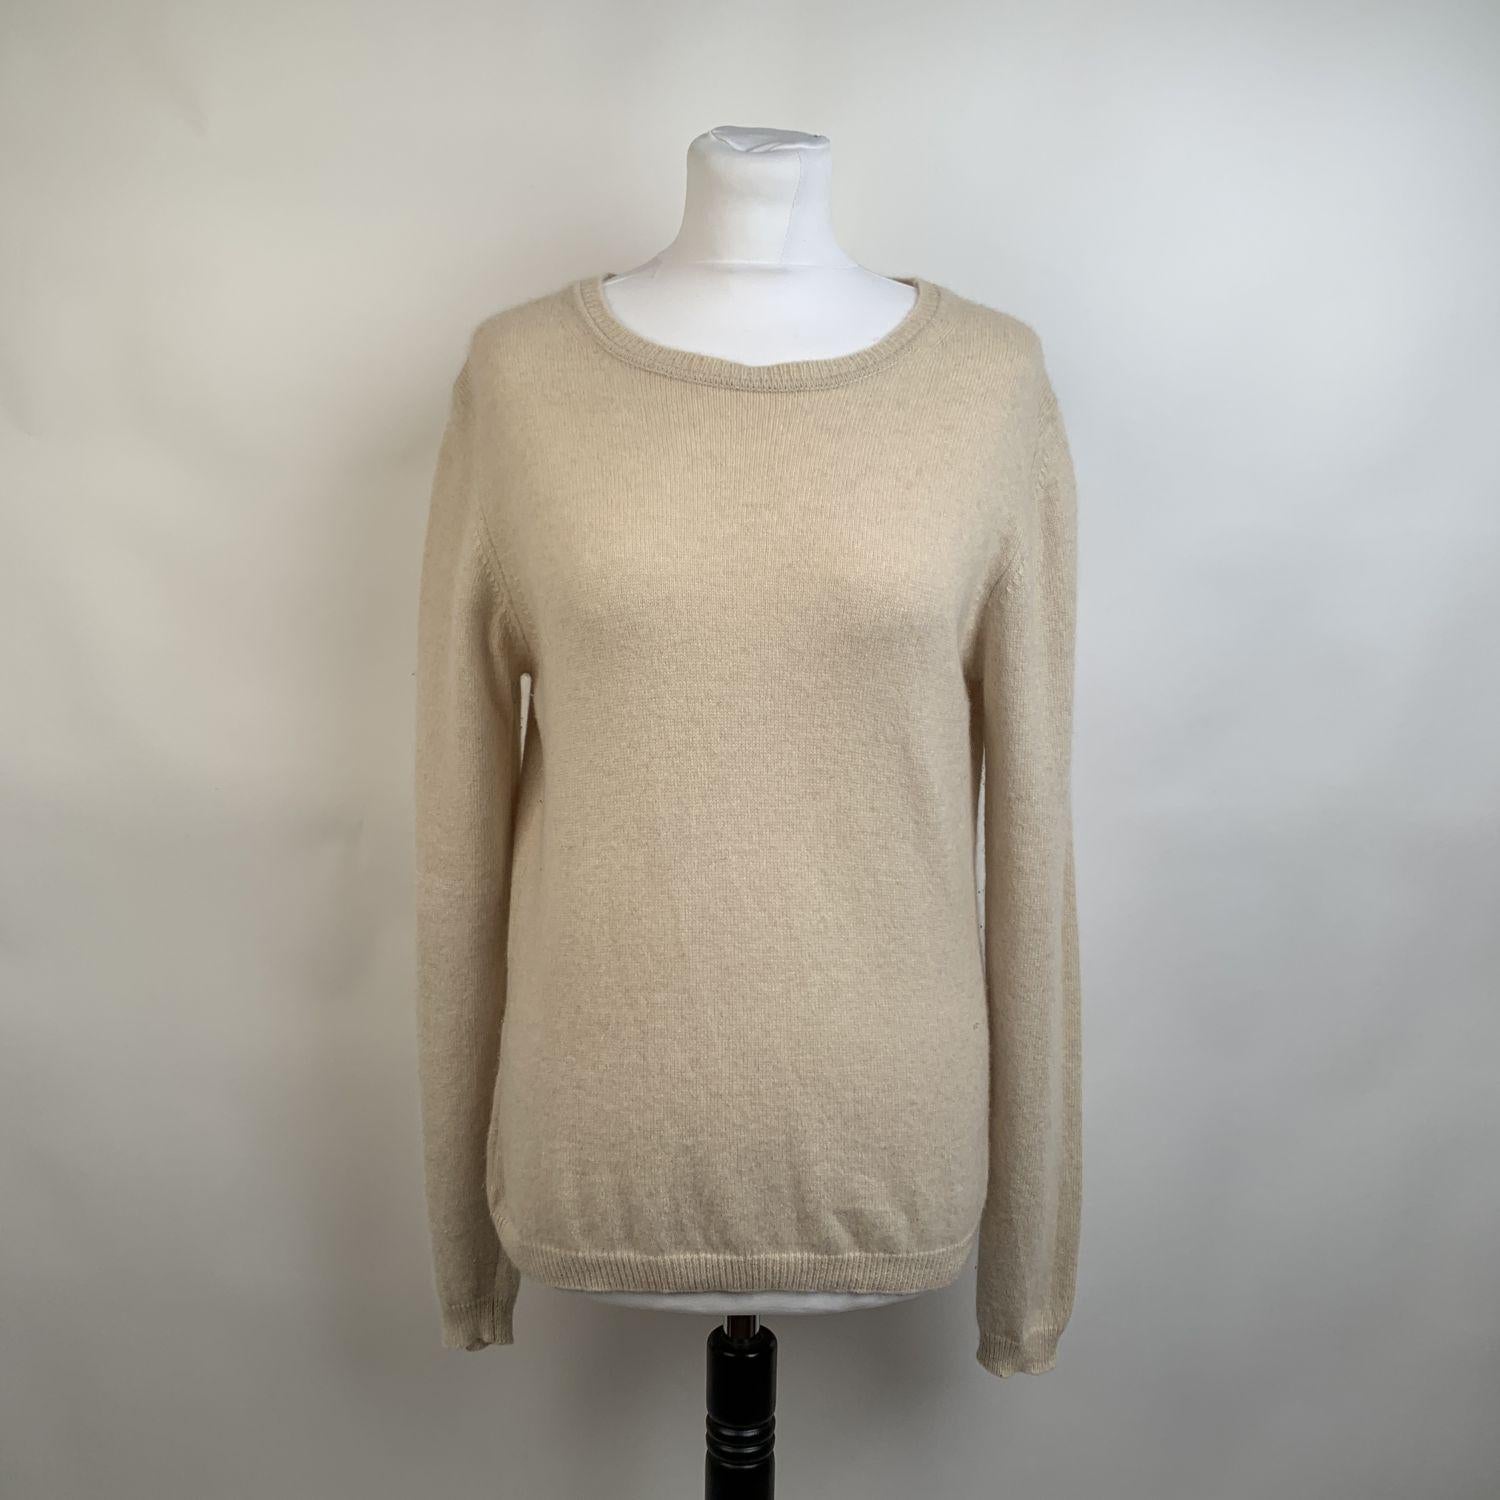 Long sleeve styling Prada jumper. Featuring boat neckline. Ivory color. Cashmere knit. Size 46. it should correspond to a MEDIUM size.



Details

MATERIAL: Cashmere

COLOR: Ivory

MODEL: Jumper

GENDER: Women

SIZE: Medium

COUNTRY OF MANUFACTURE: